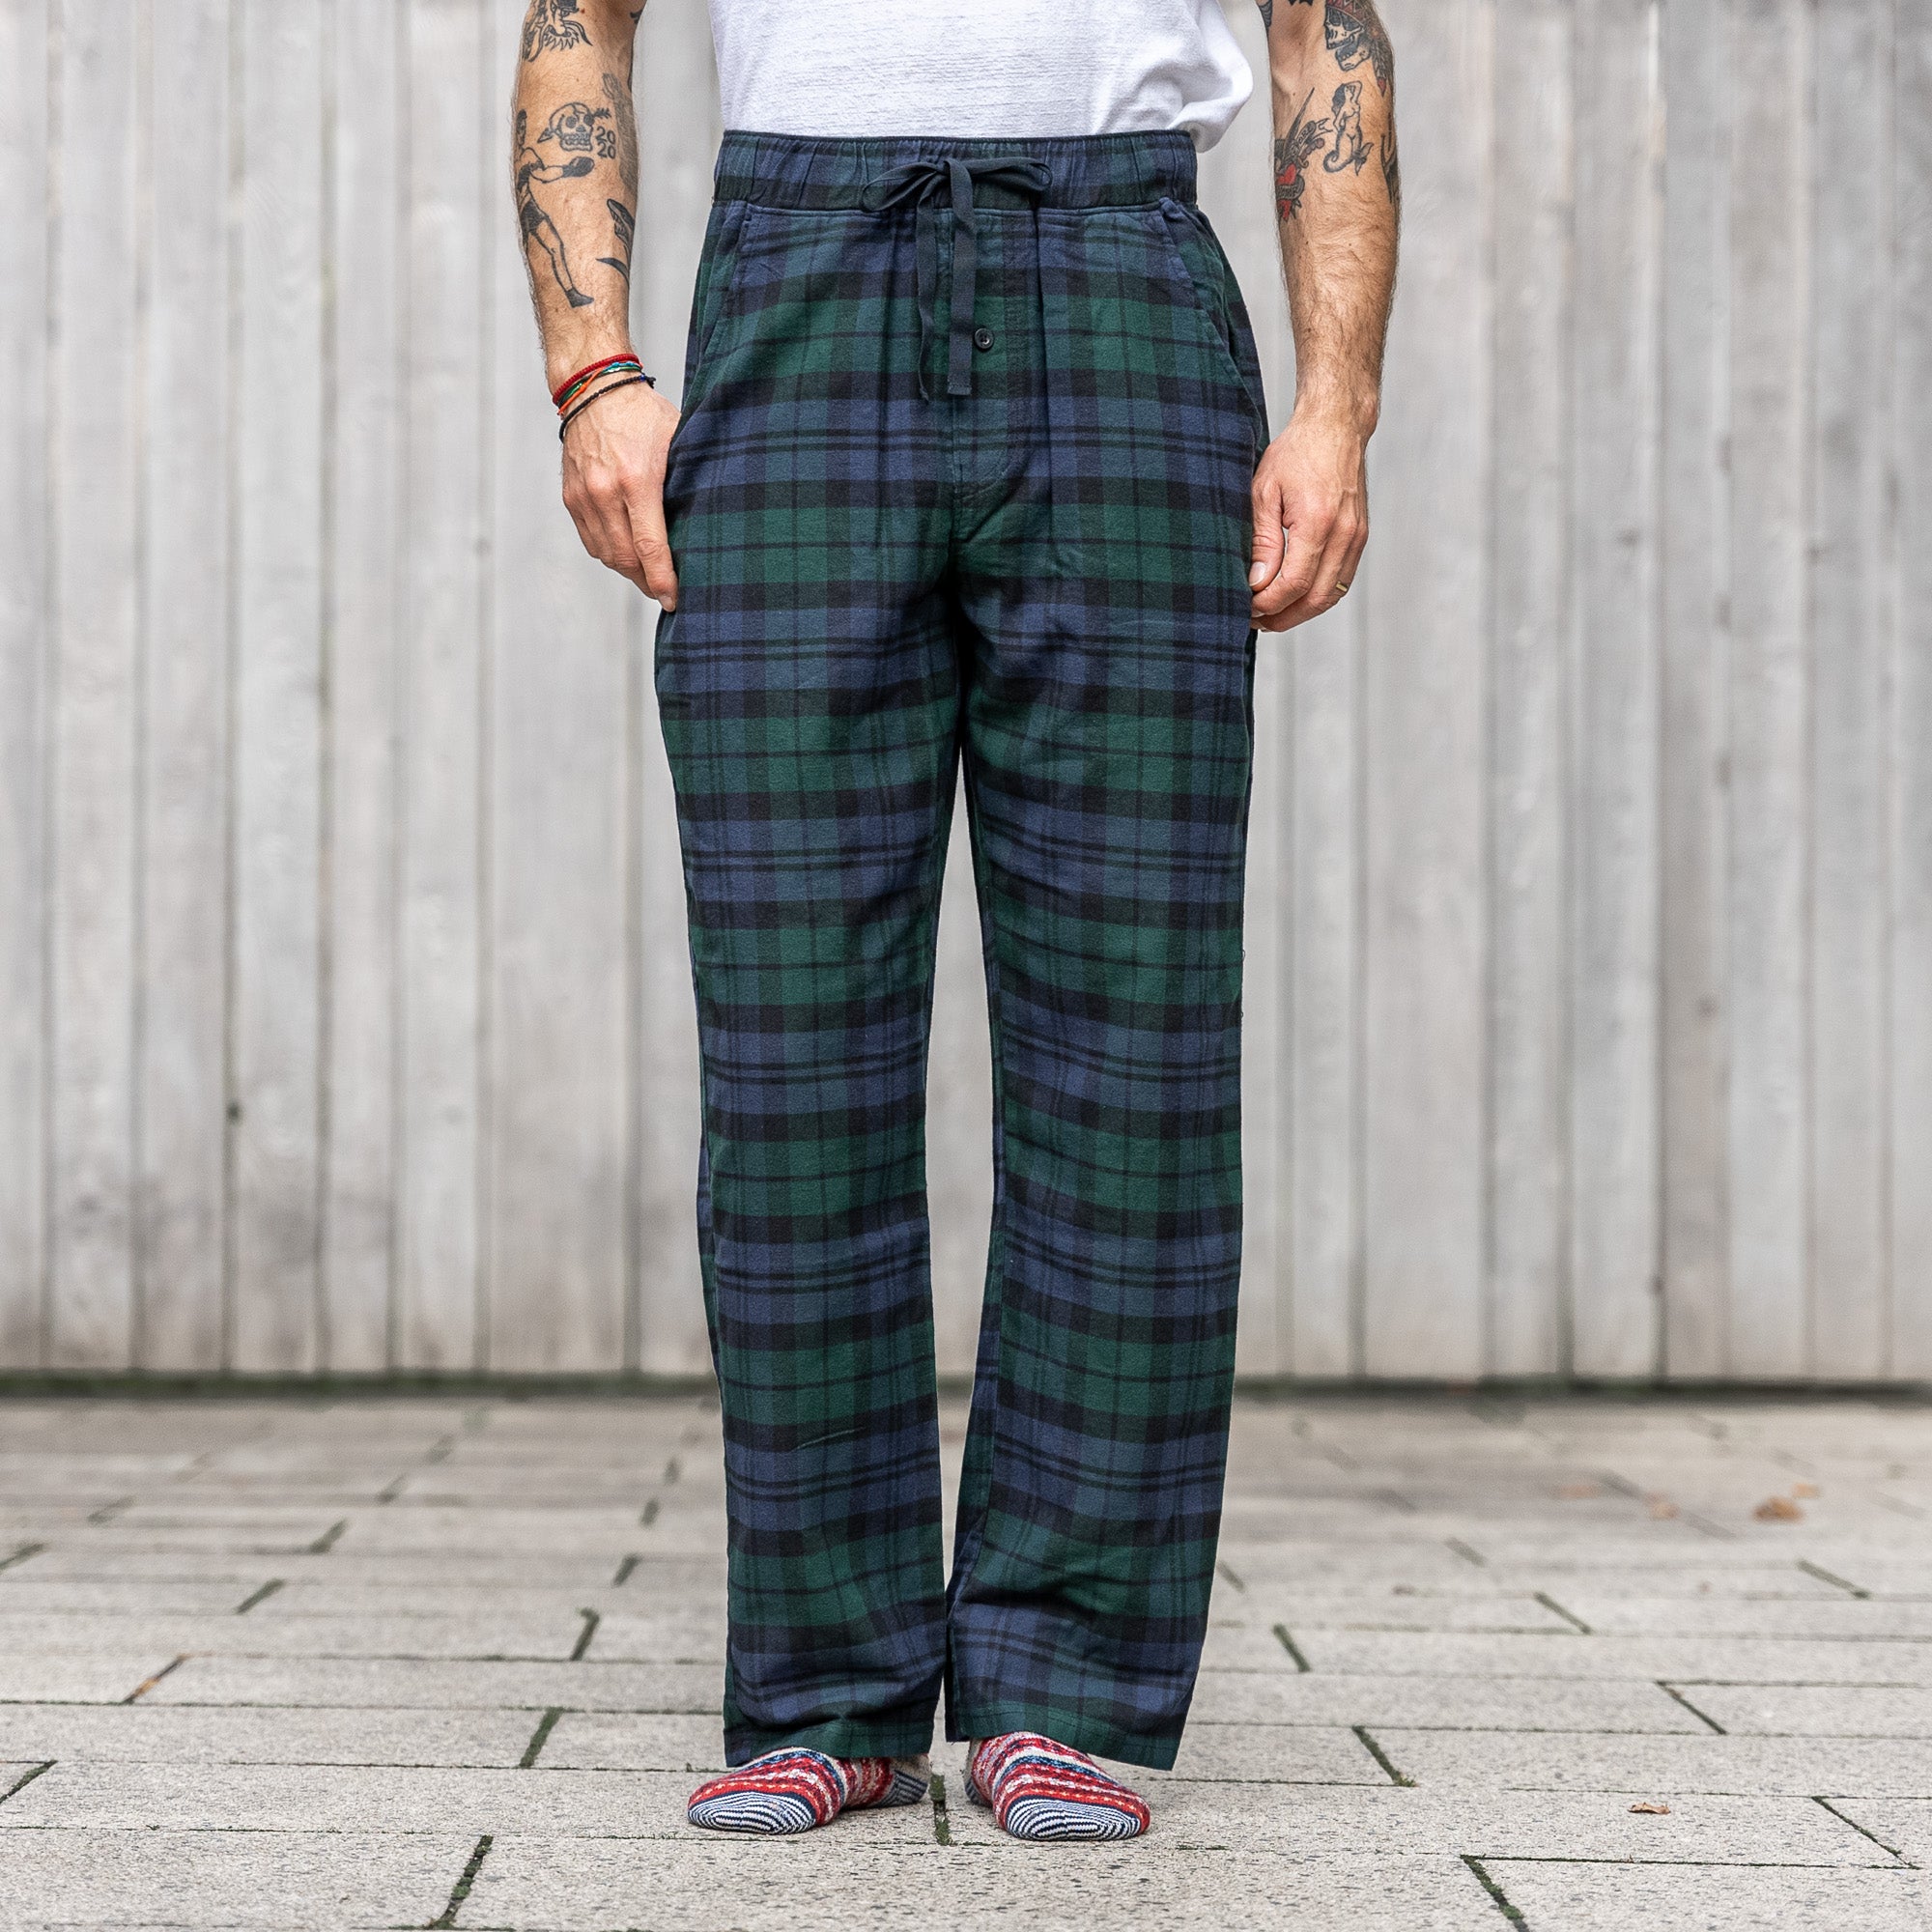 X CHAIN STORE Red Tartan Check Pyjama Bottoms PJs Brushed Pure Cotton